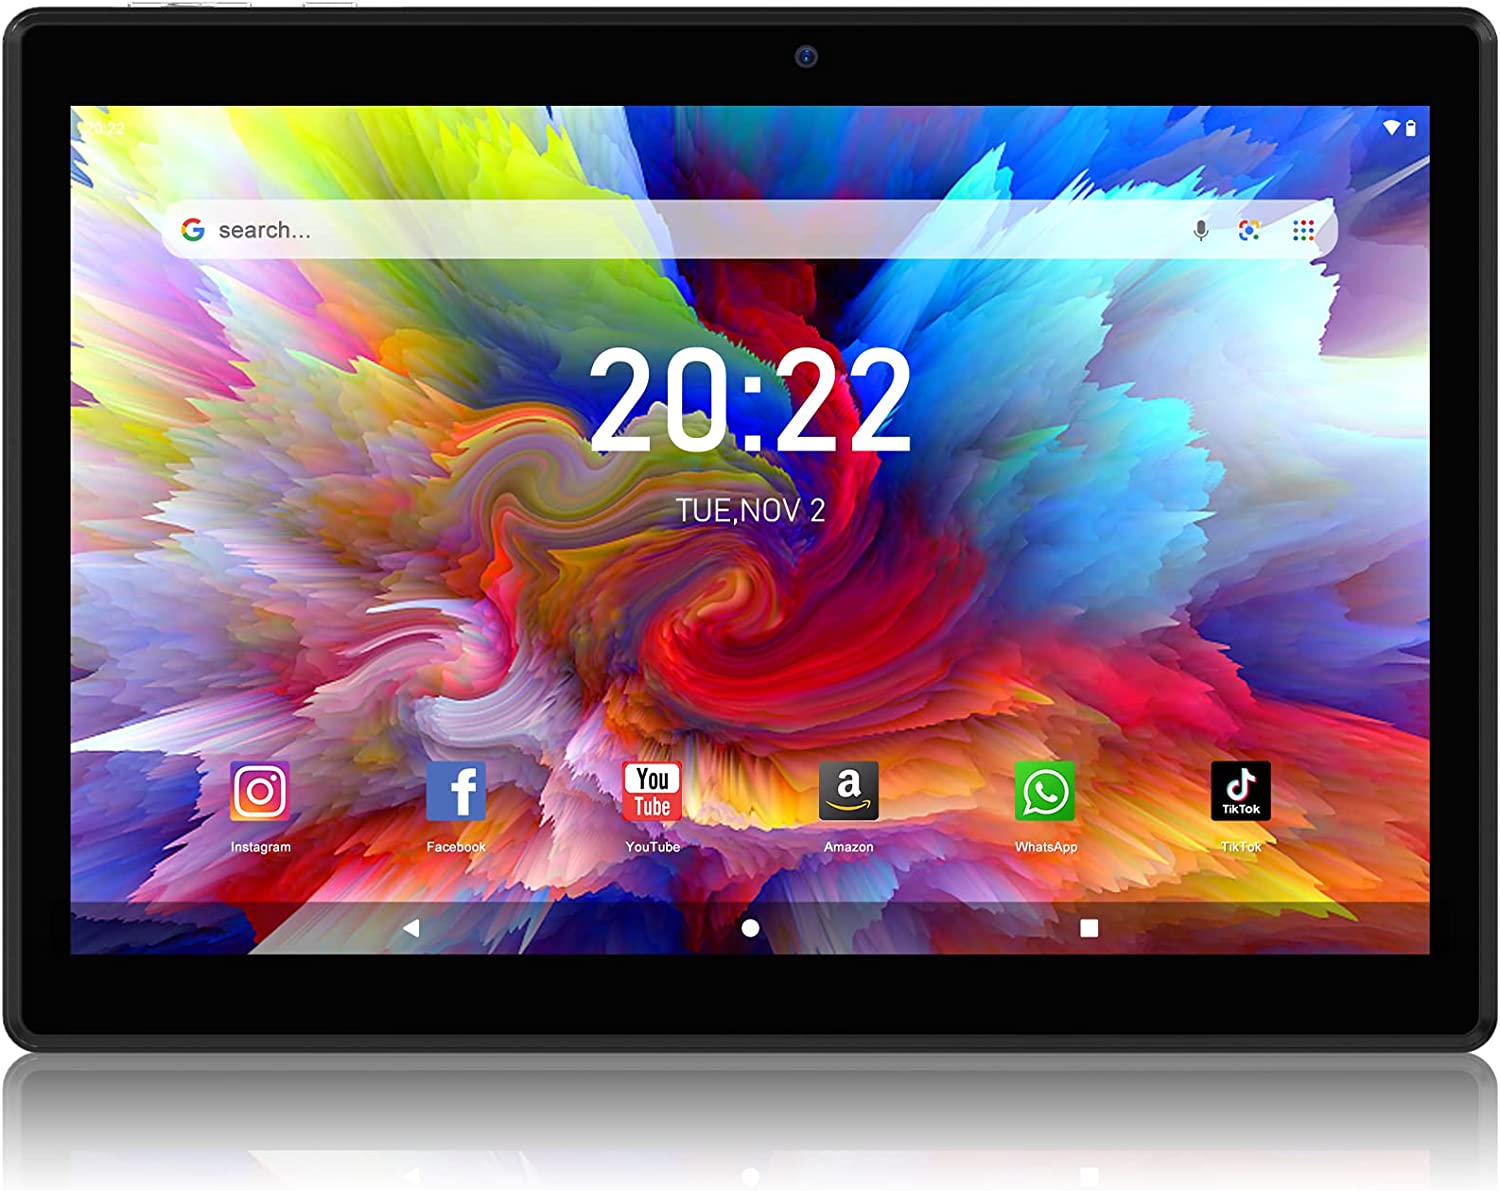 Tablet 10 pollici, Android 10.0 Tablet, processore quad-core, 2GB RAM